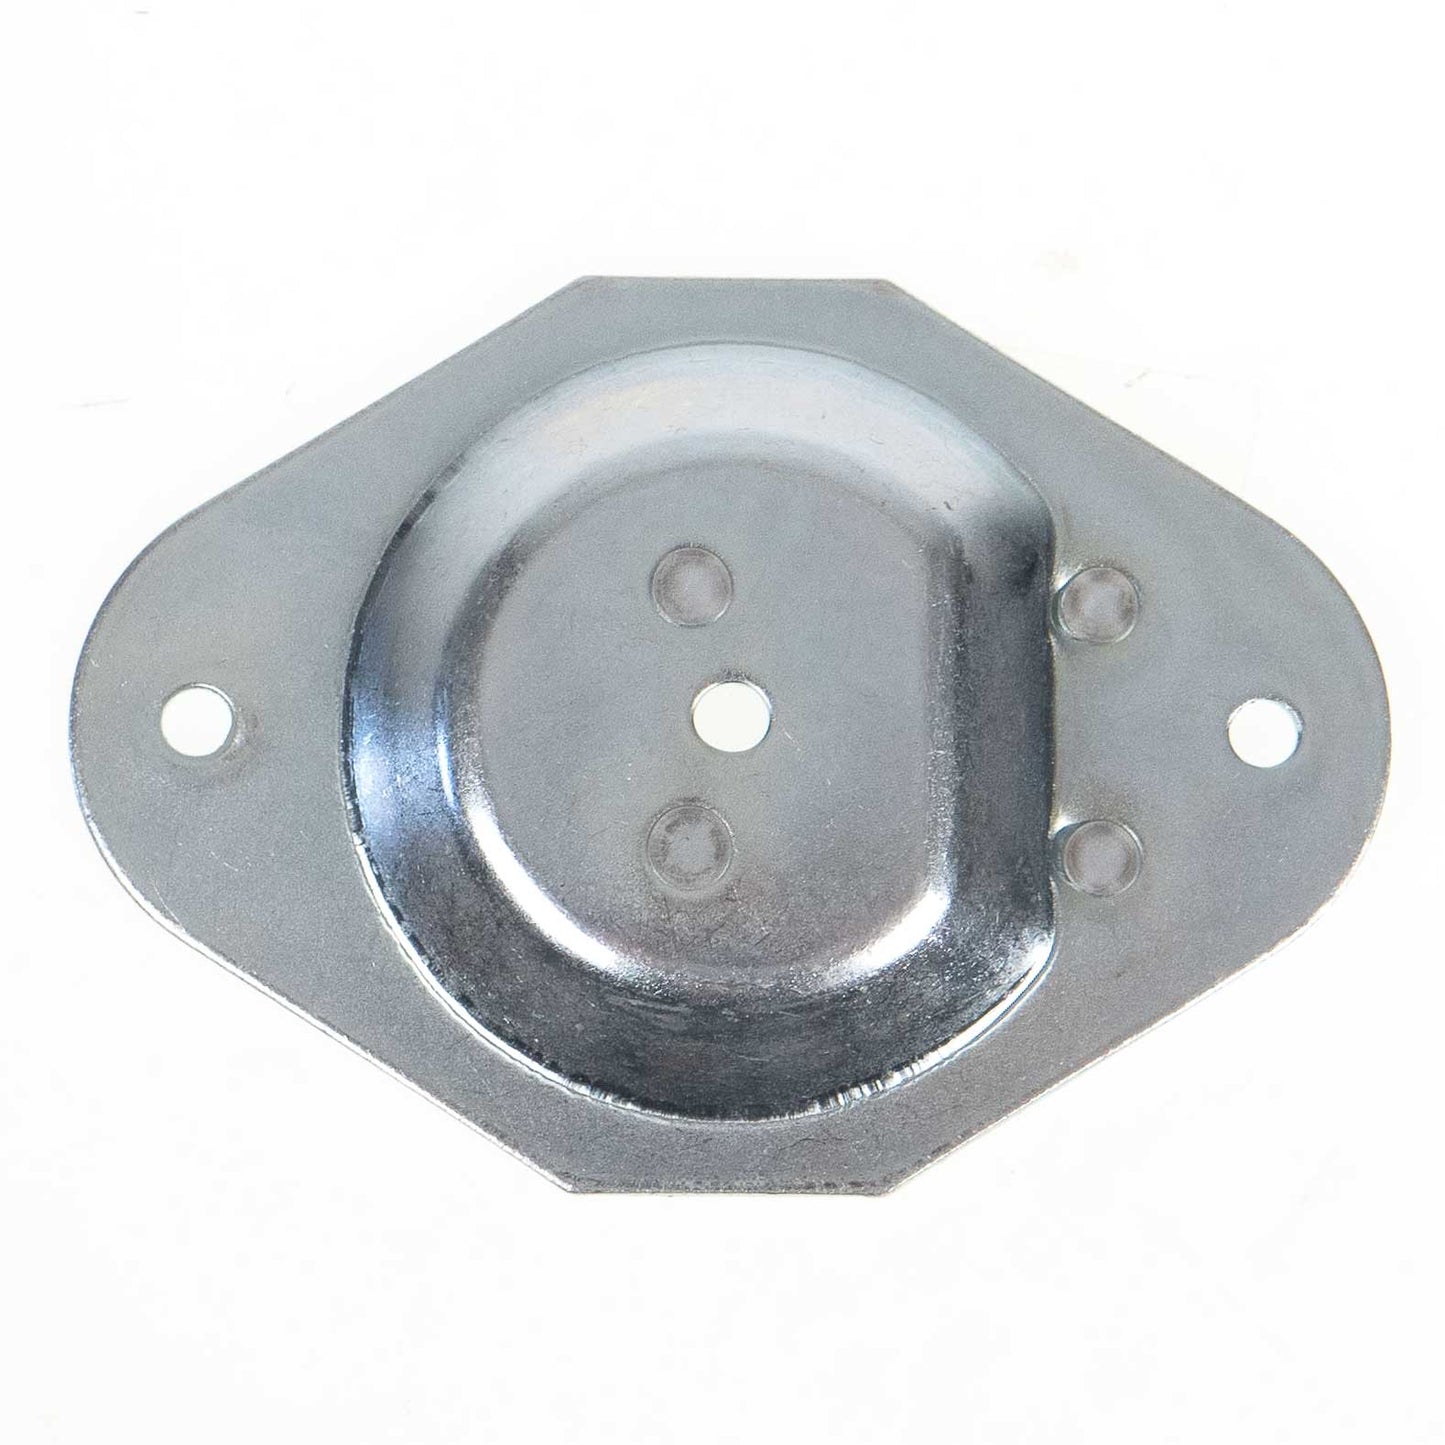 Zinc Plated Recessed Pan Fitting - 900 lbs BS